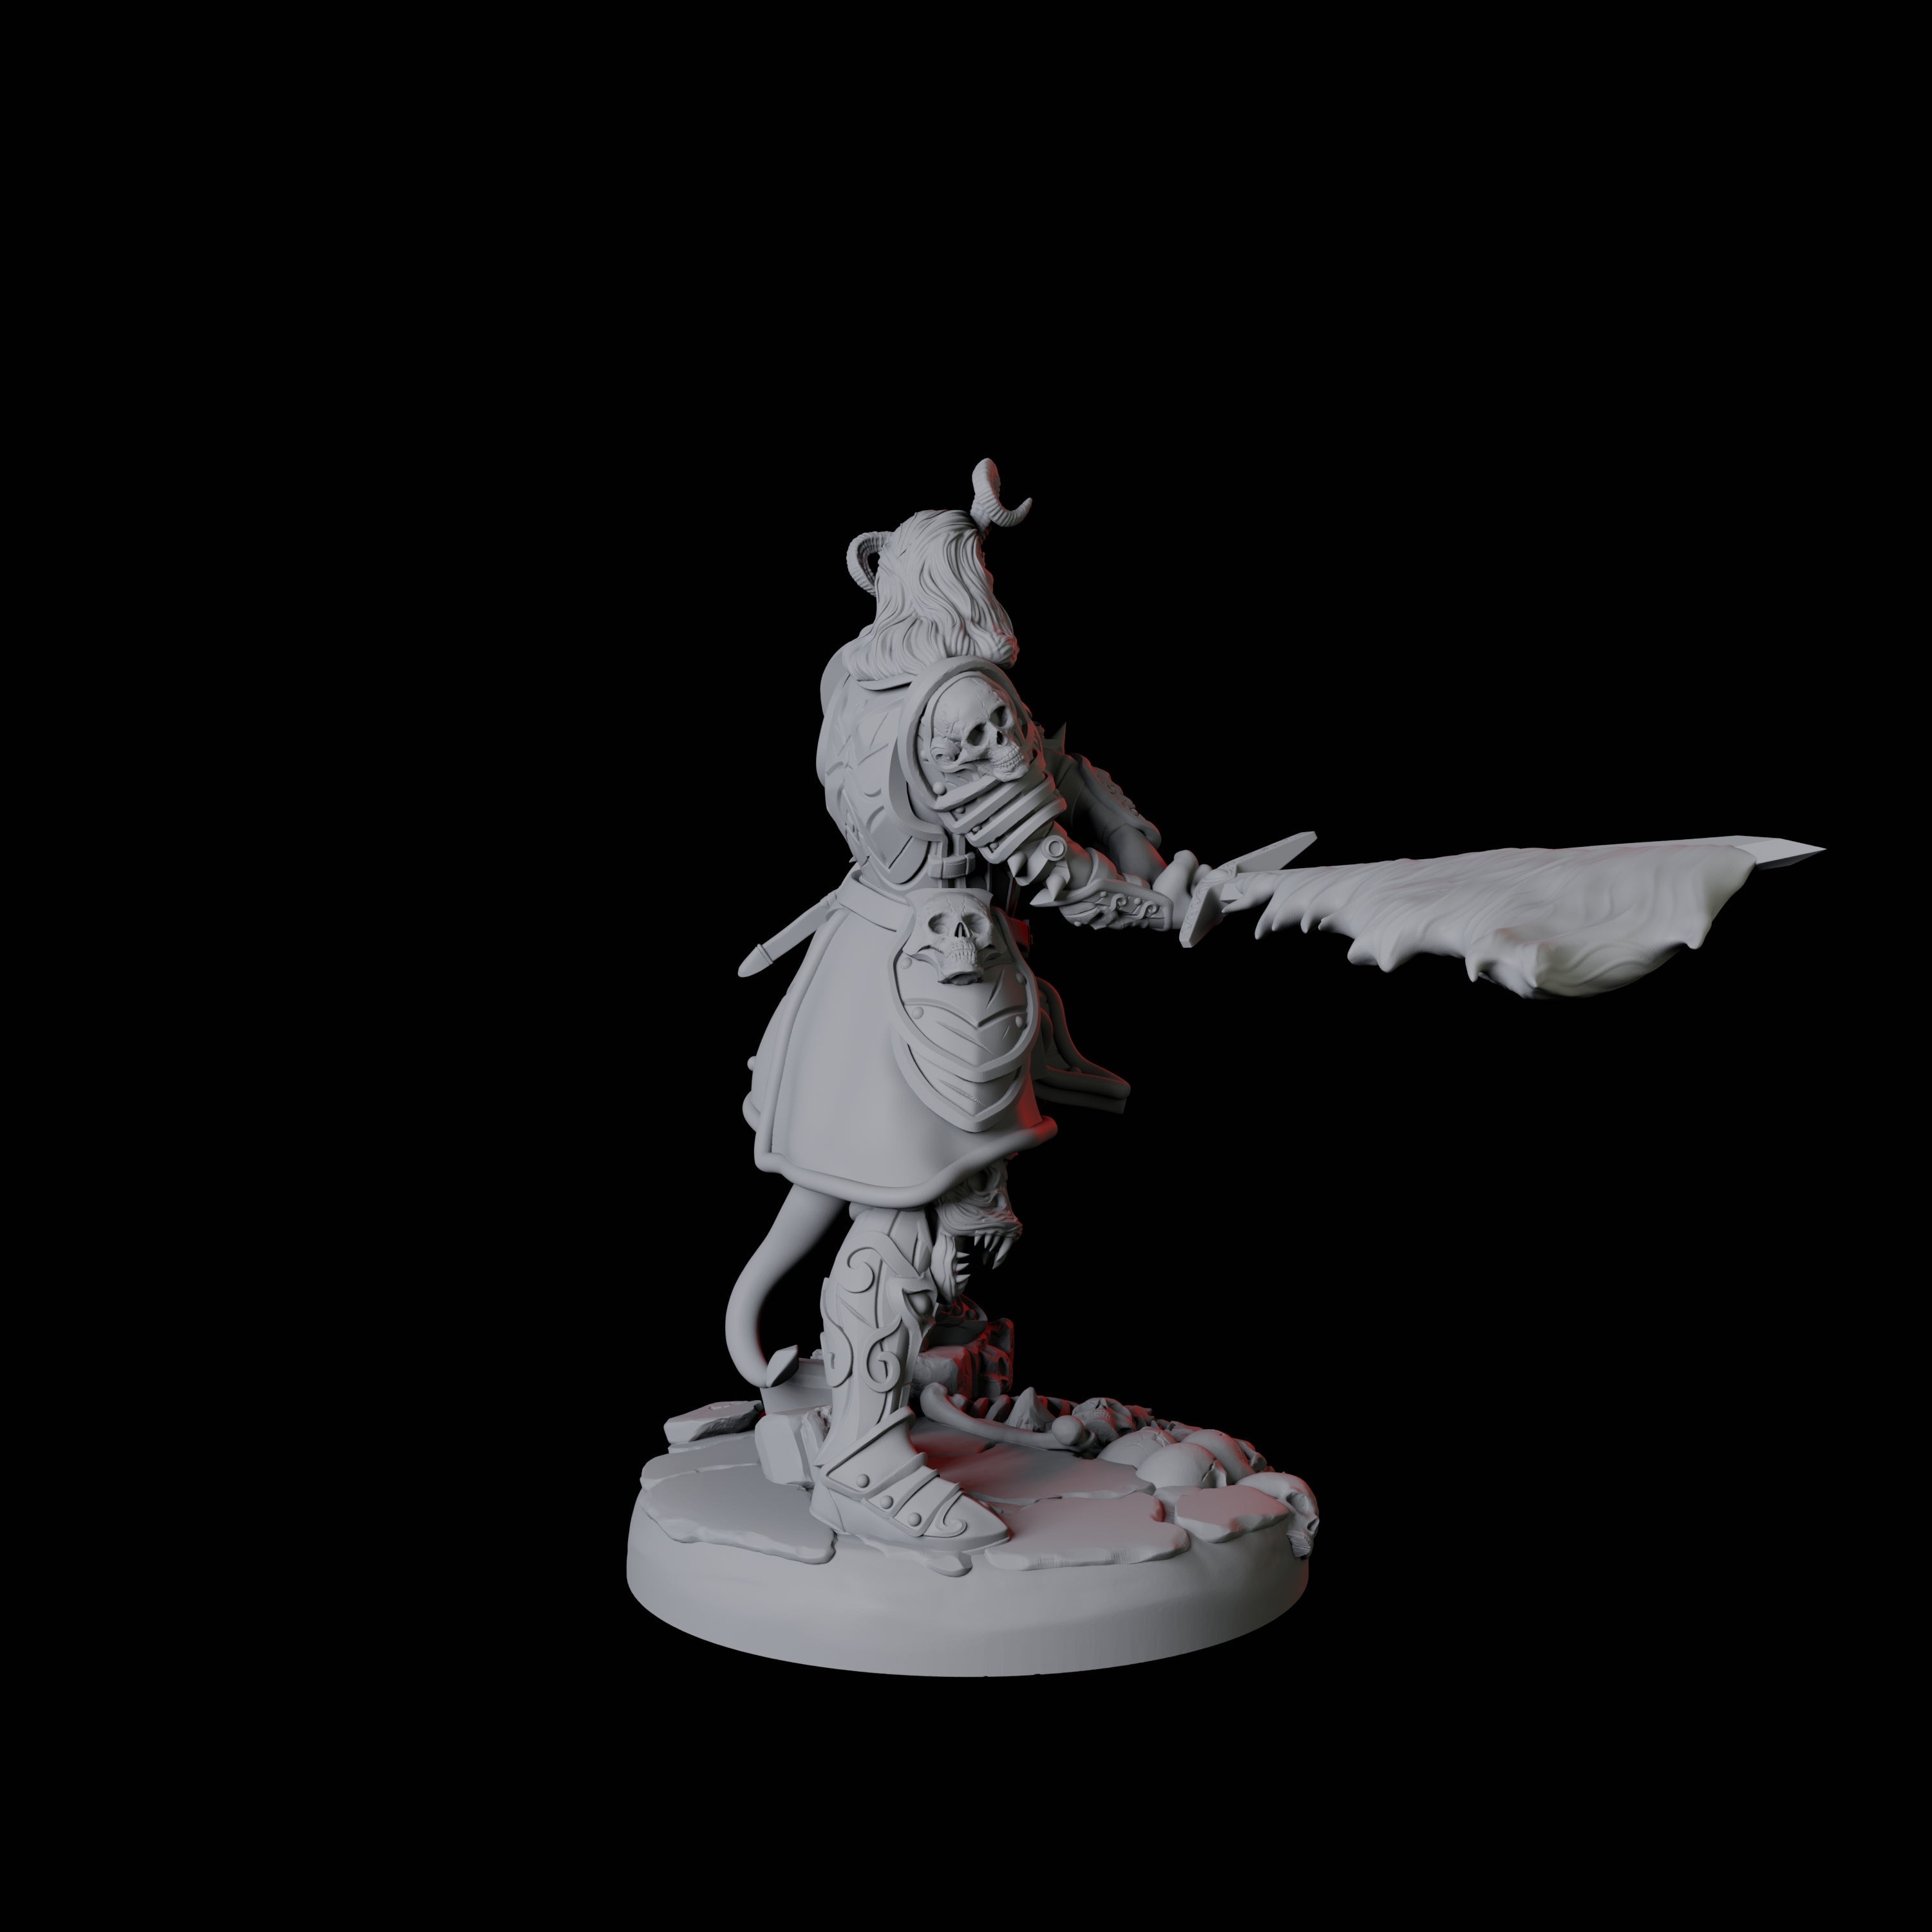 Four Threatening Bearded Devils Miniature for Dungeons and Dragons, Pathfinder or other TTRPGs